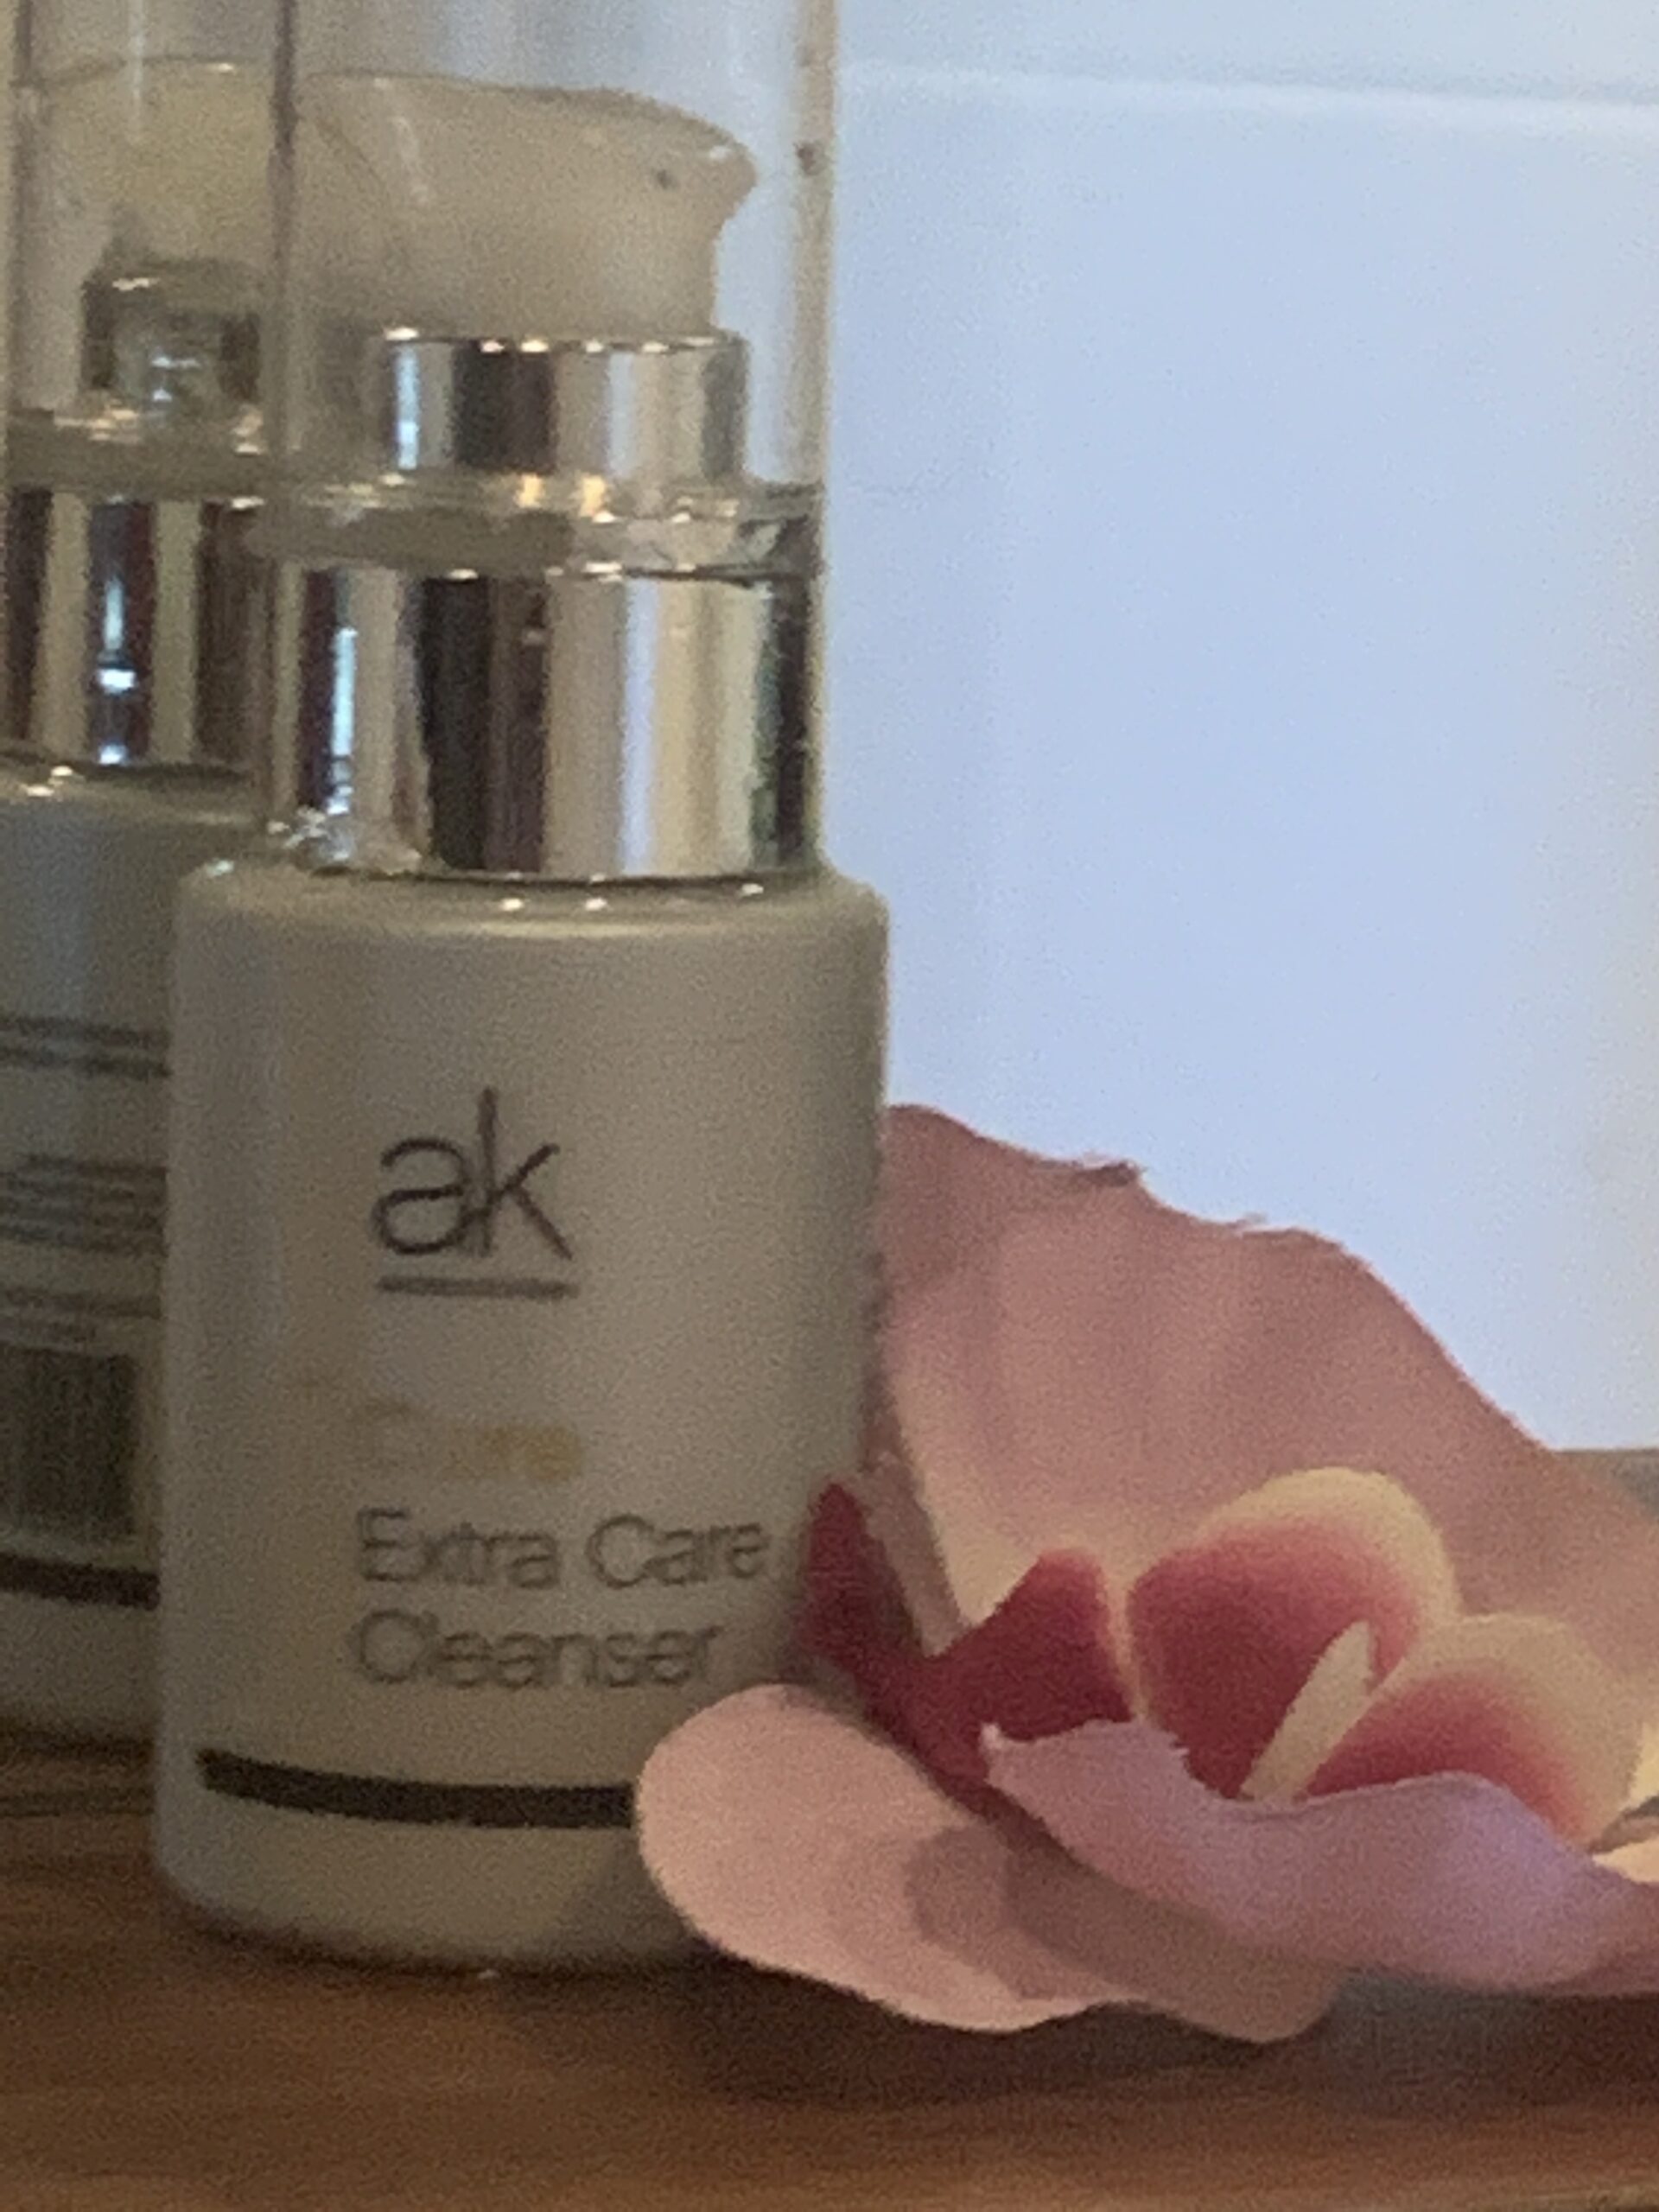 AK Extra Care Cleanser